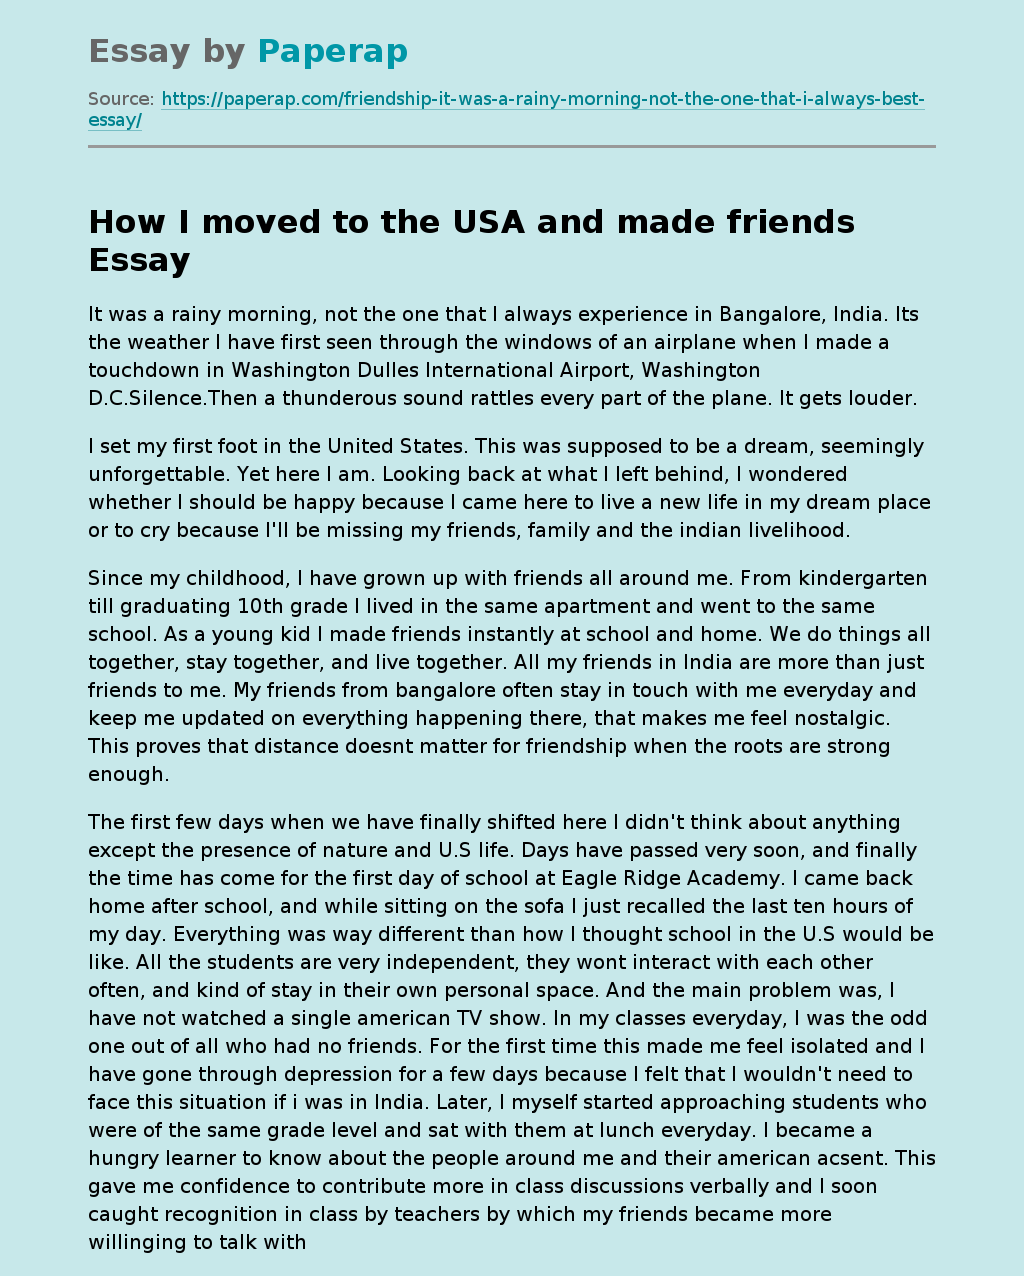 How I moved to the USA and made friends